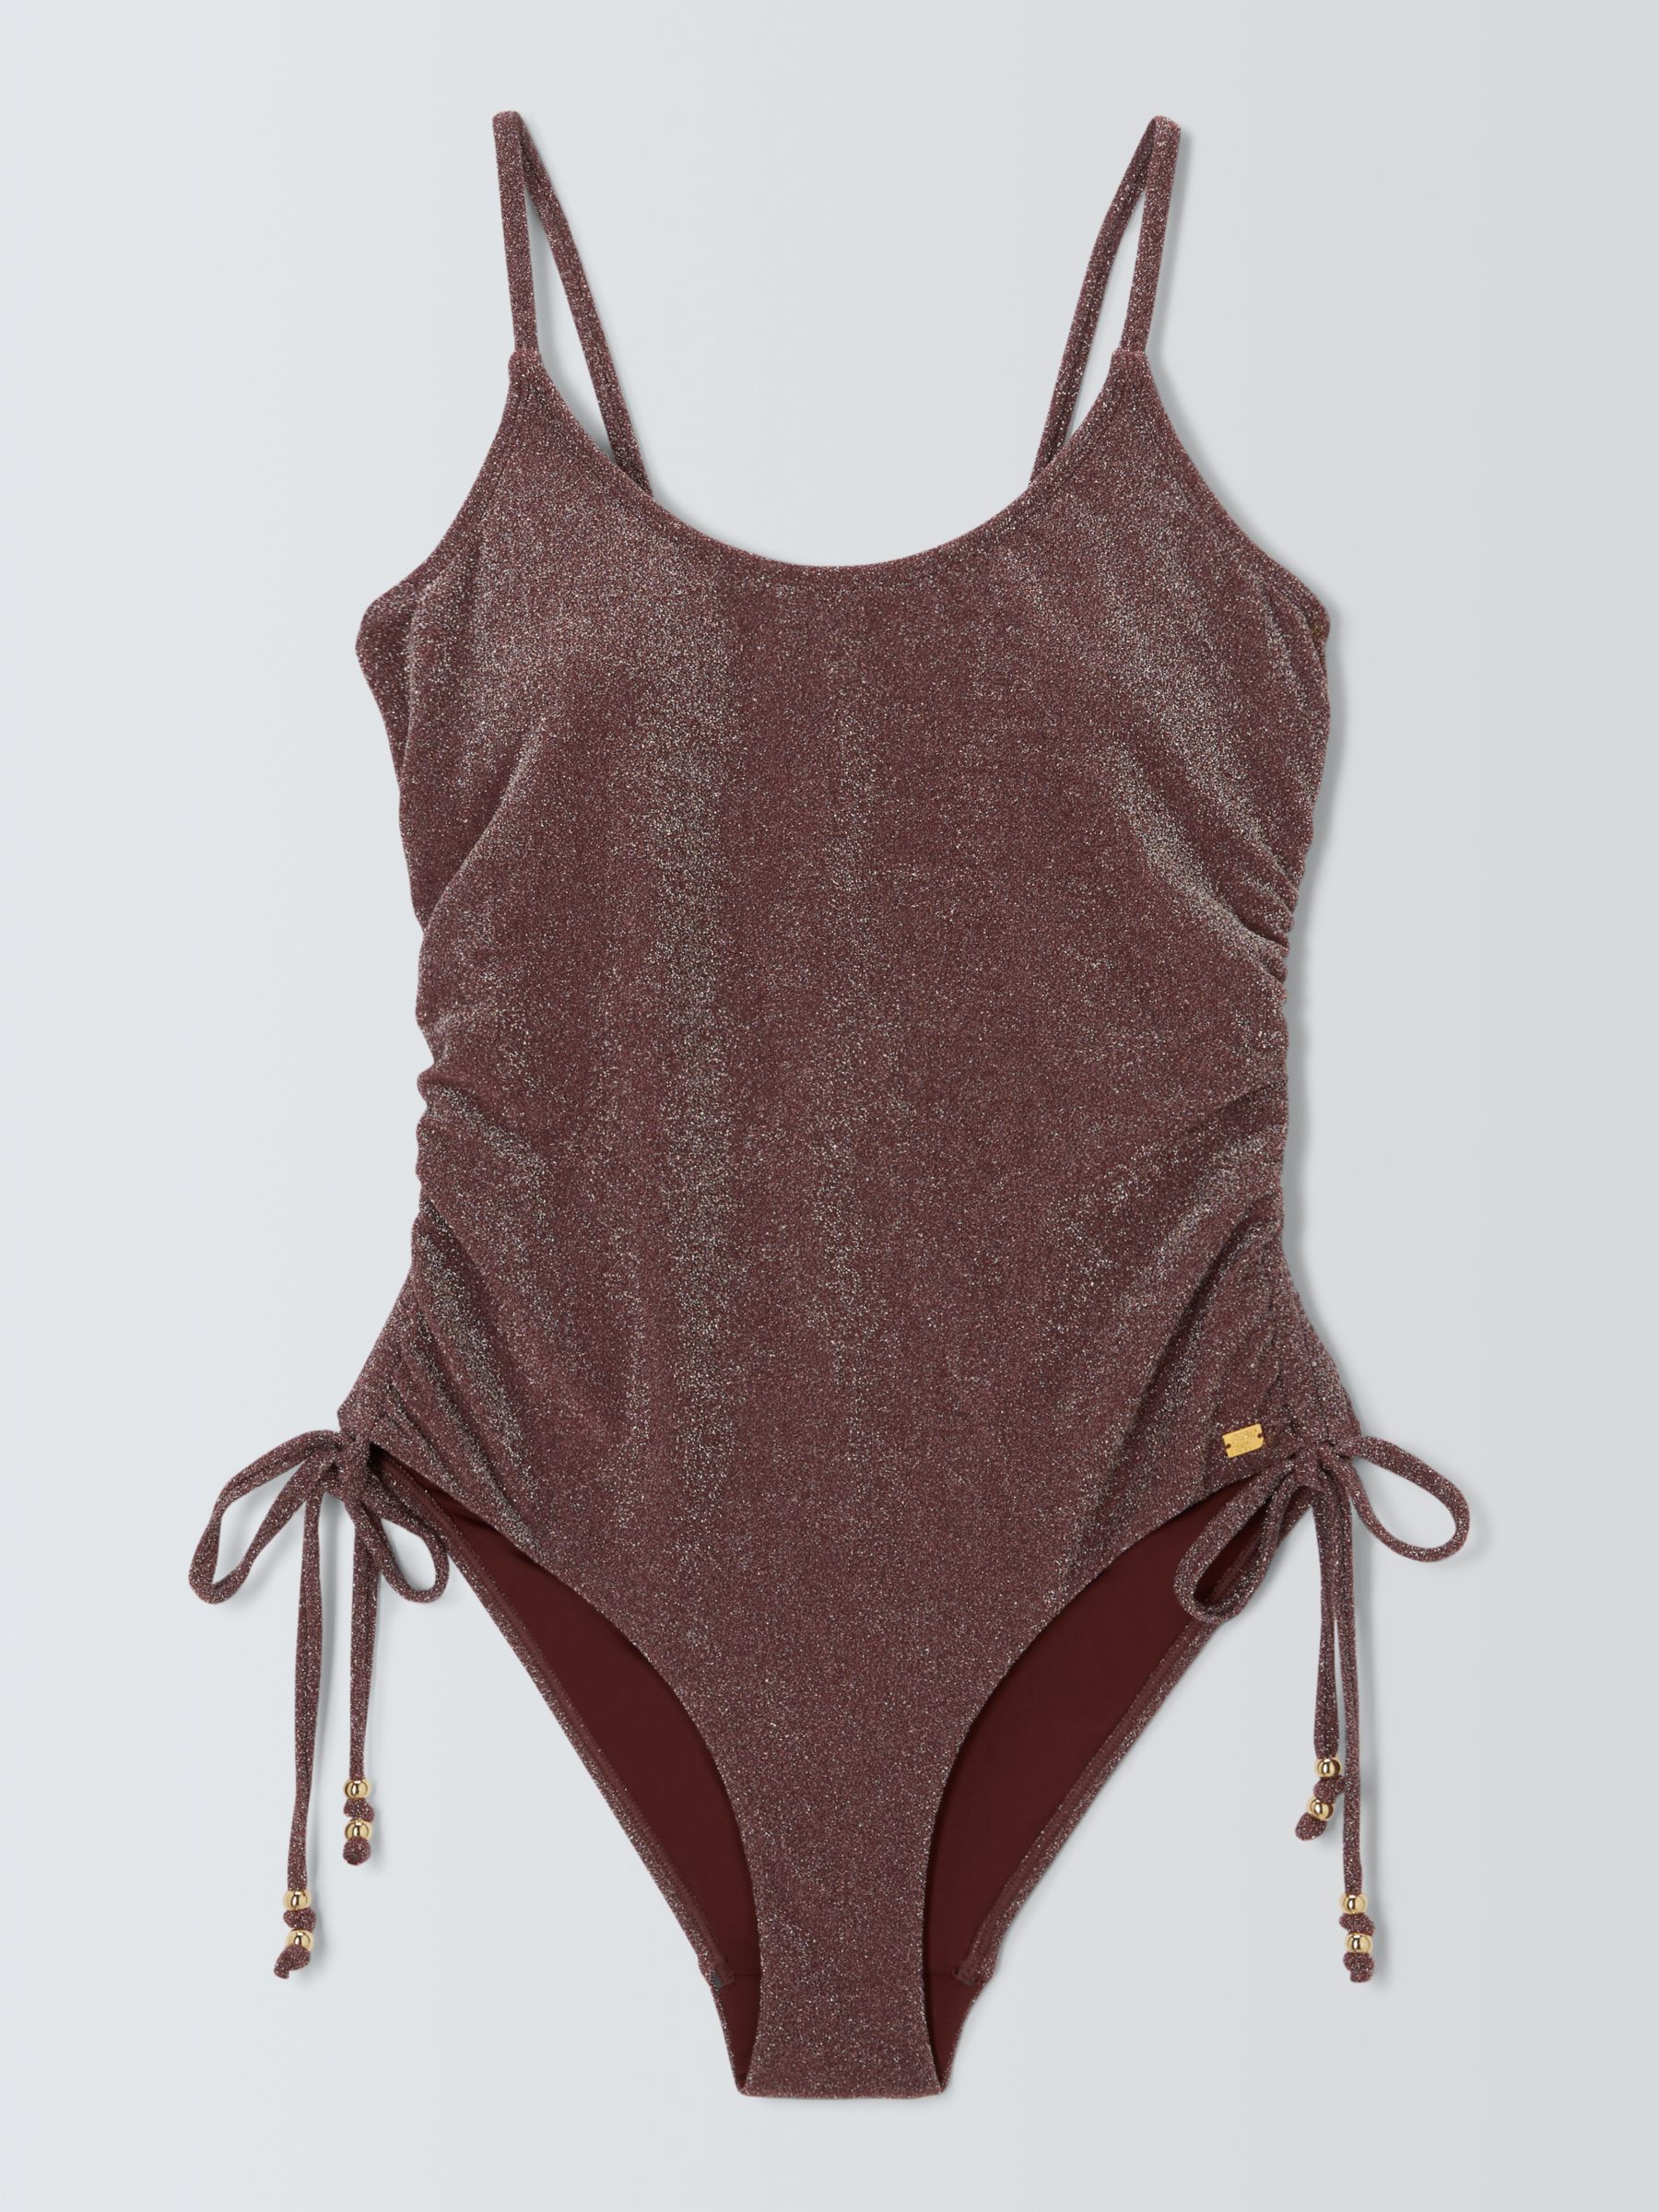 AND/OR Shimmer Ruched Swimsuit, Chocolate, 8